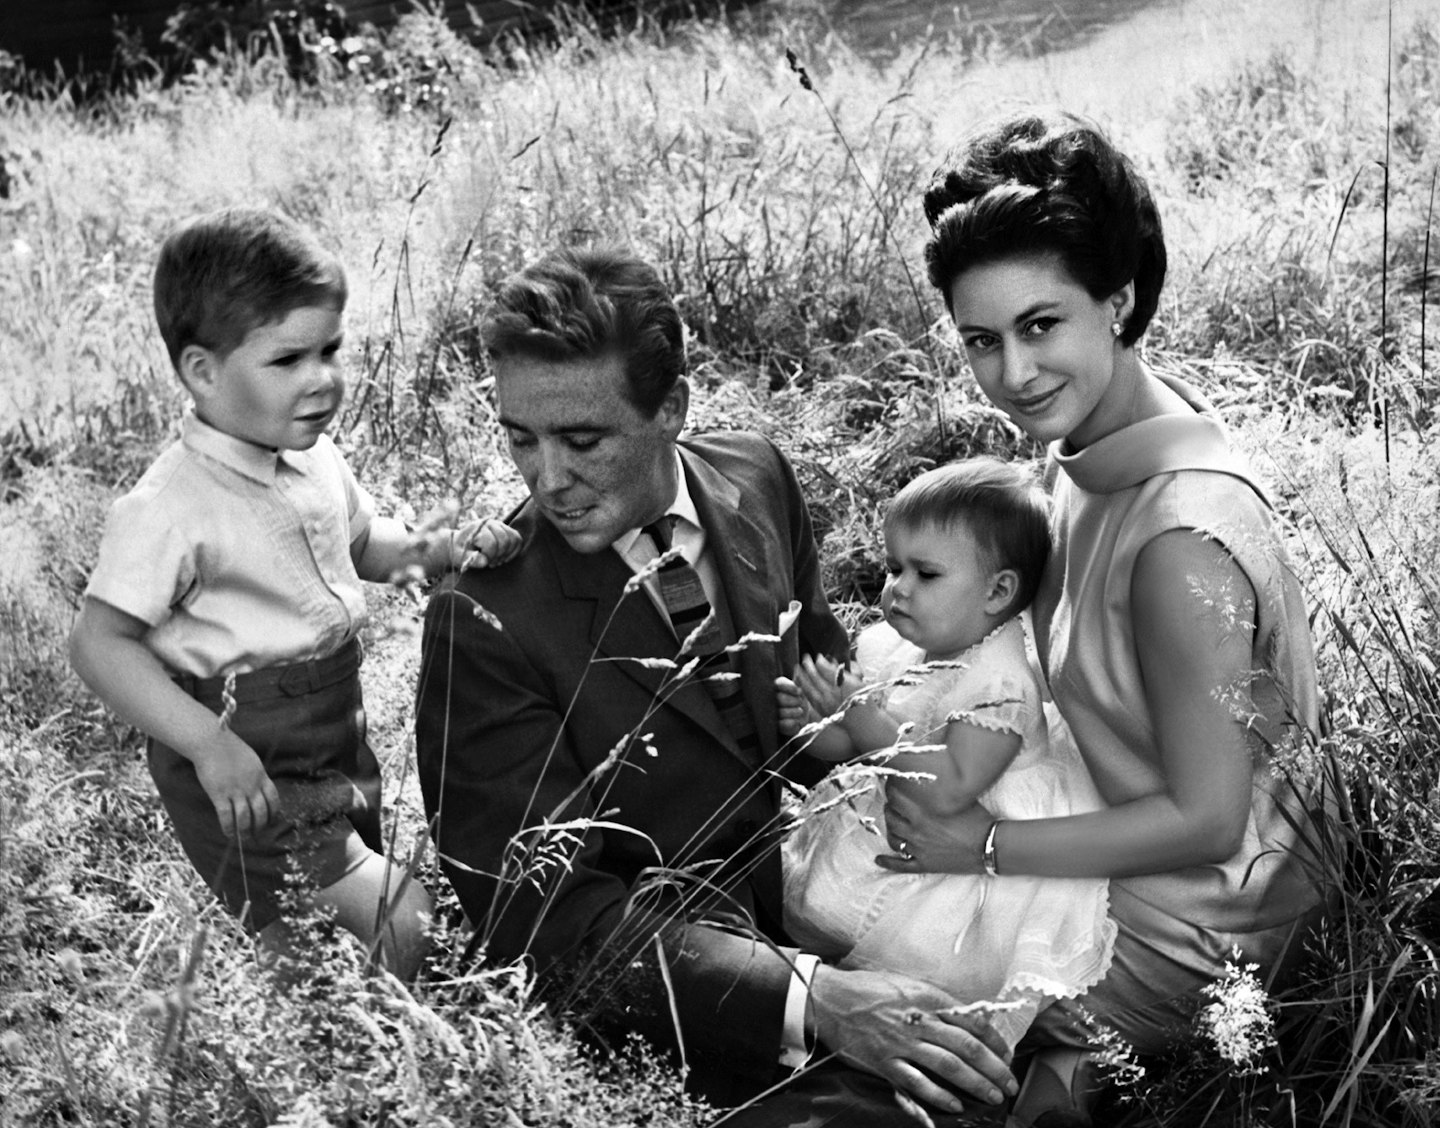 Princess Margaret, Lord Snowdon and their children in 1964